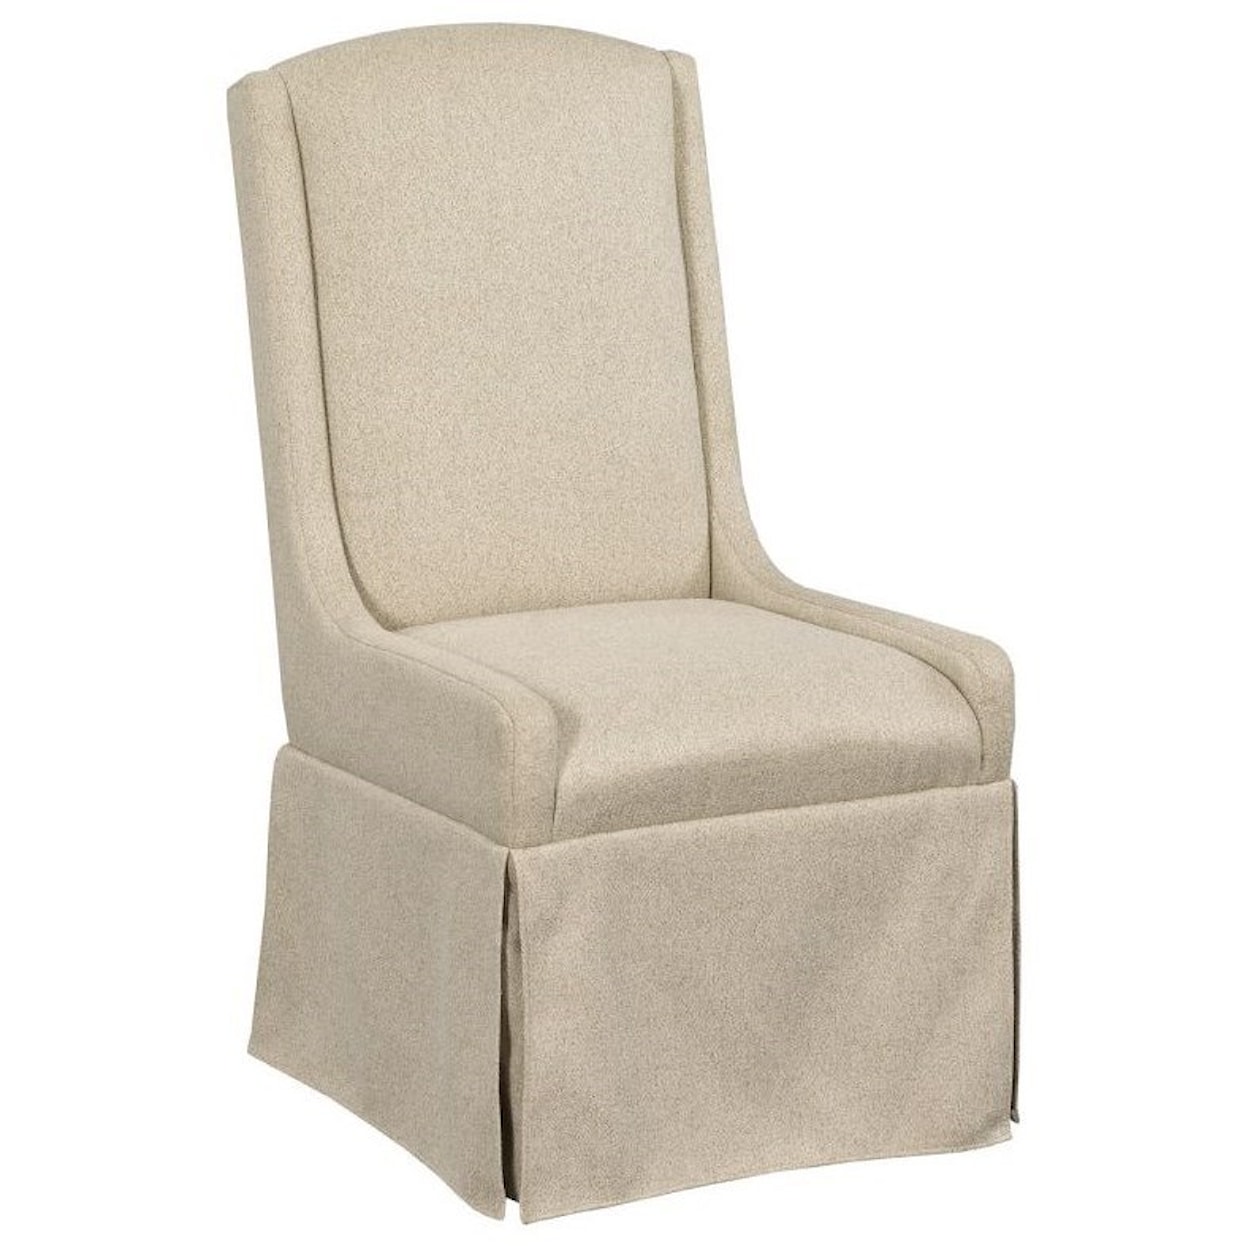 Kincaid Furniture Mill House Barrier Slip Covered Dining Chair